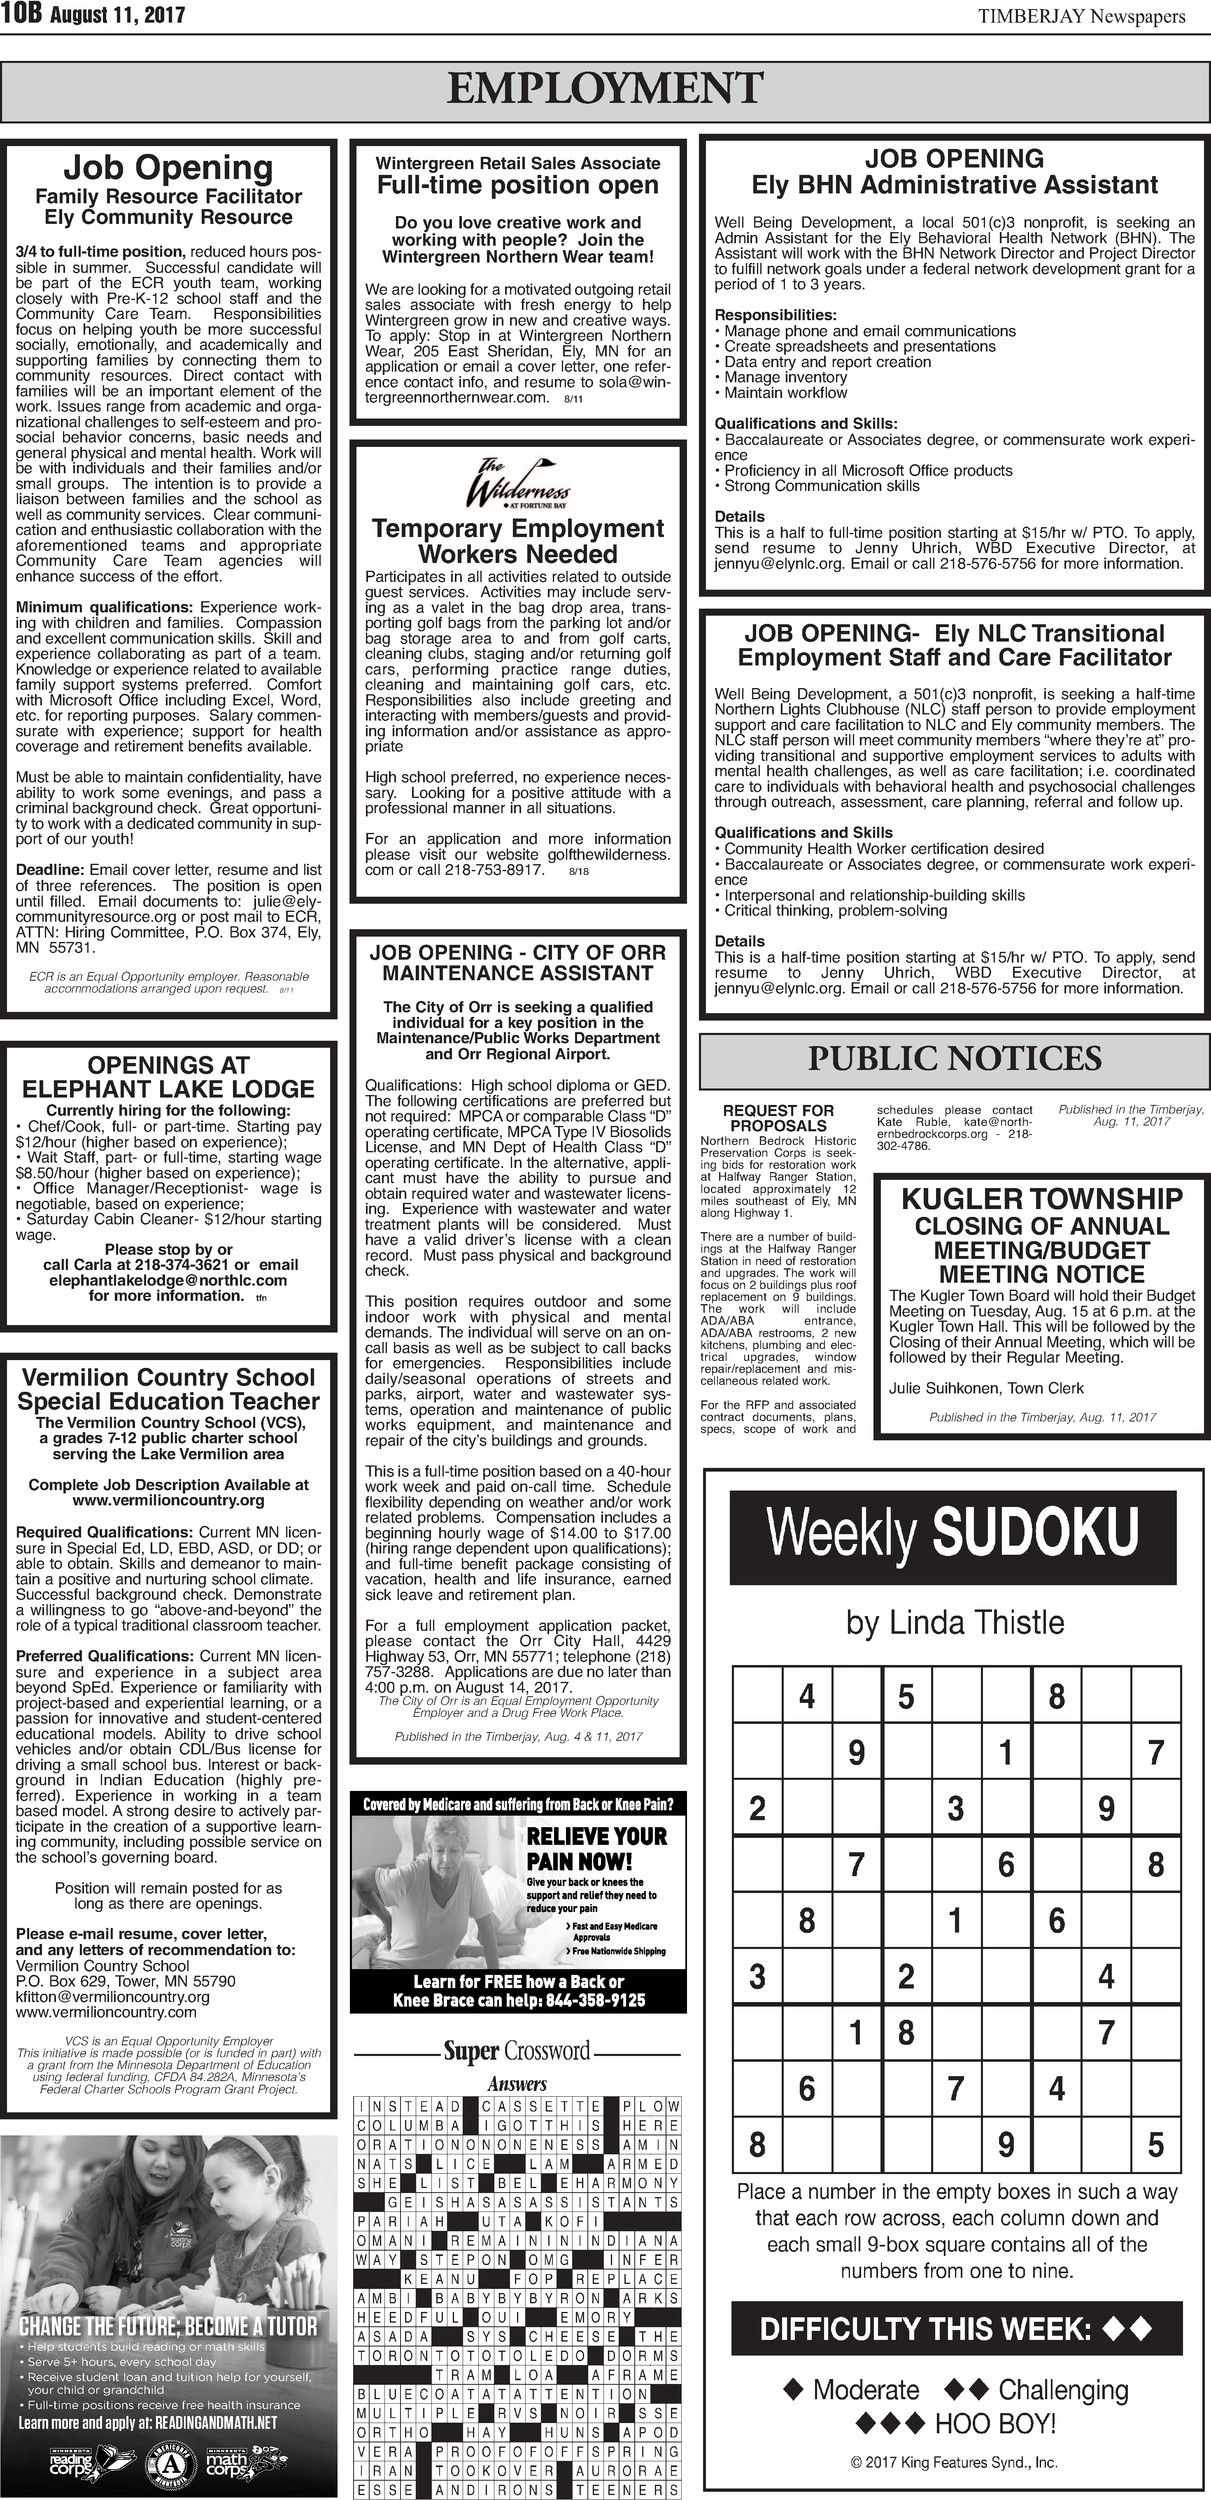 Click here for the legal notices and classifieds from page 10B